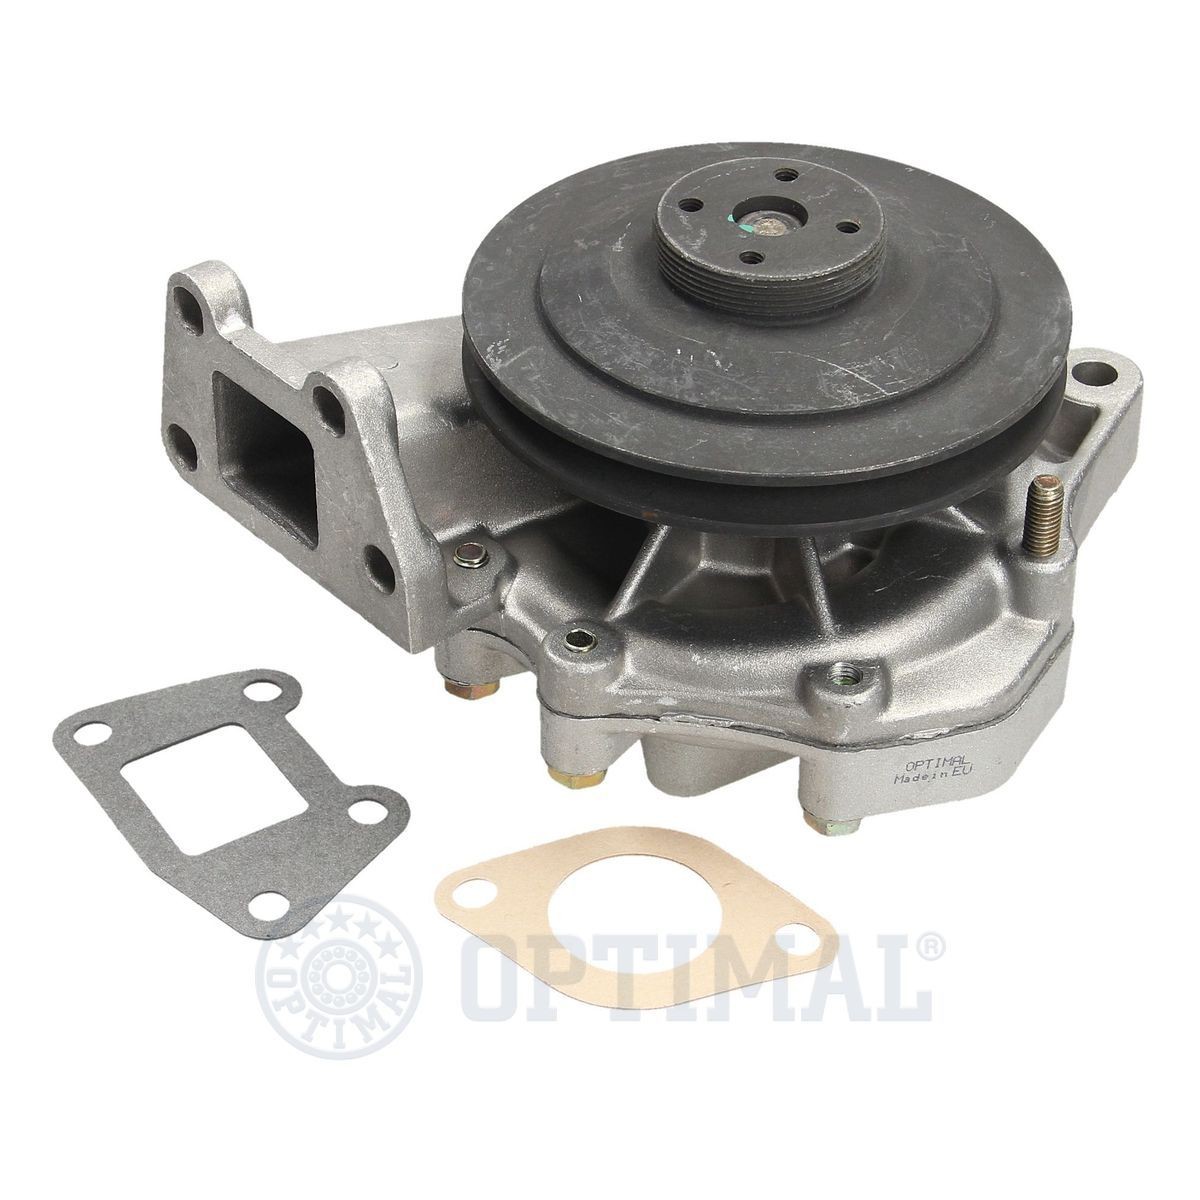 OPTIMAL AQ-1624 Water pump with belt pulley, with gaskets/seals, Belt Pulley Ø: 131 mm, with housing